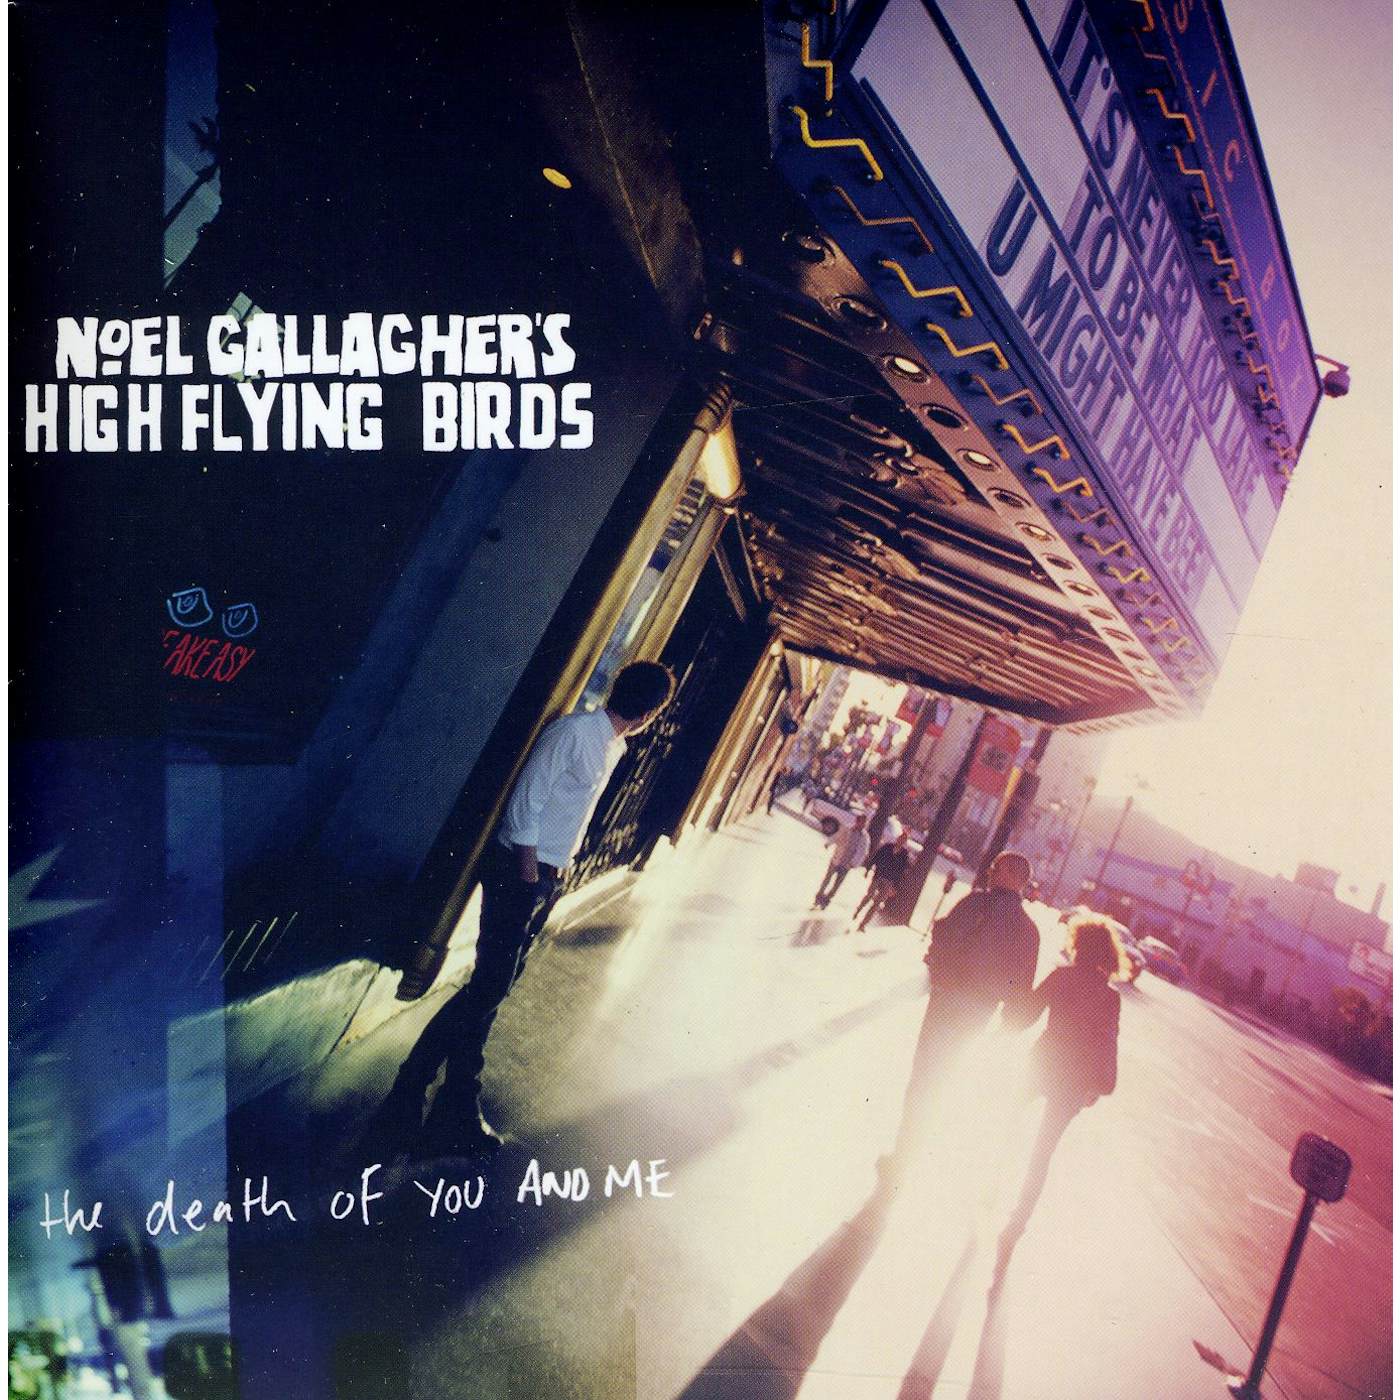 Noel Gallagher's High Flying Birds DEATH OF YOU & ME Vinyl Record